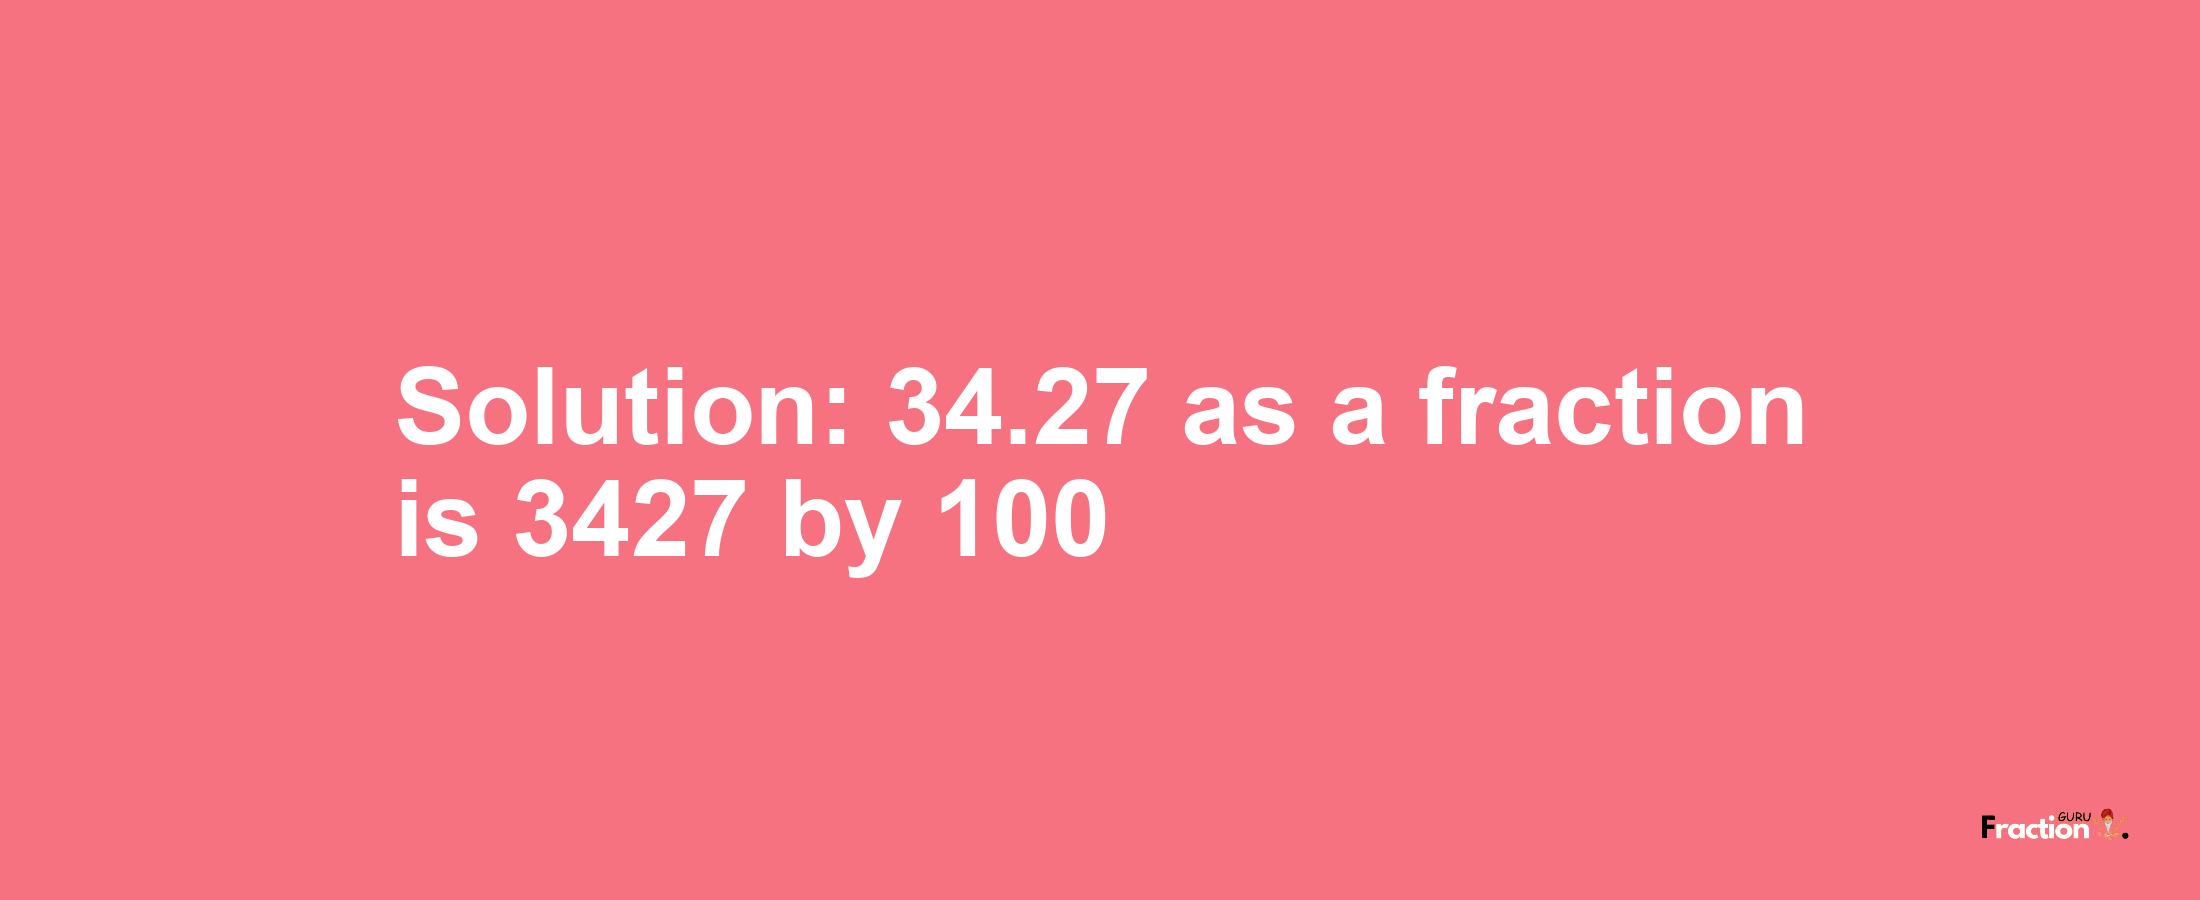 Solution:34.27 as a fraction is 3427/100